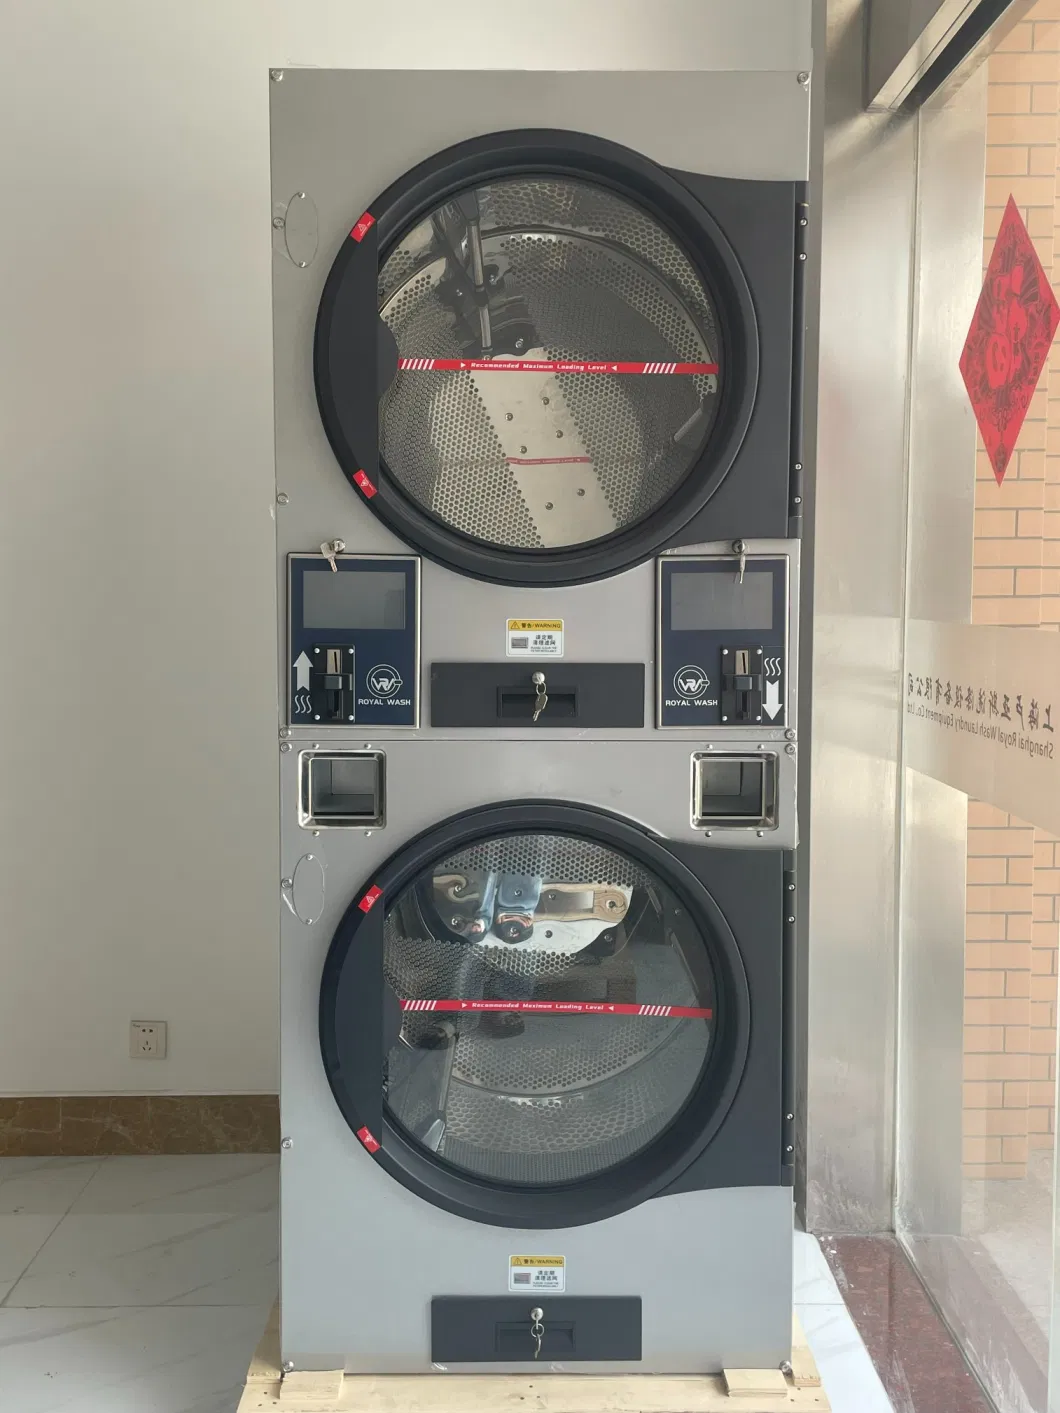 Stainless Steel Laundry Vending Commercial Industrial Fully Automatic Stack Dryers Machine